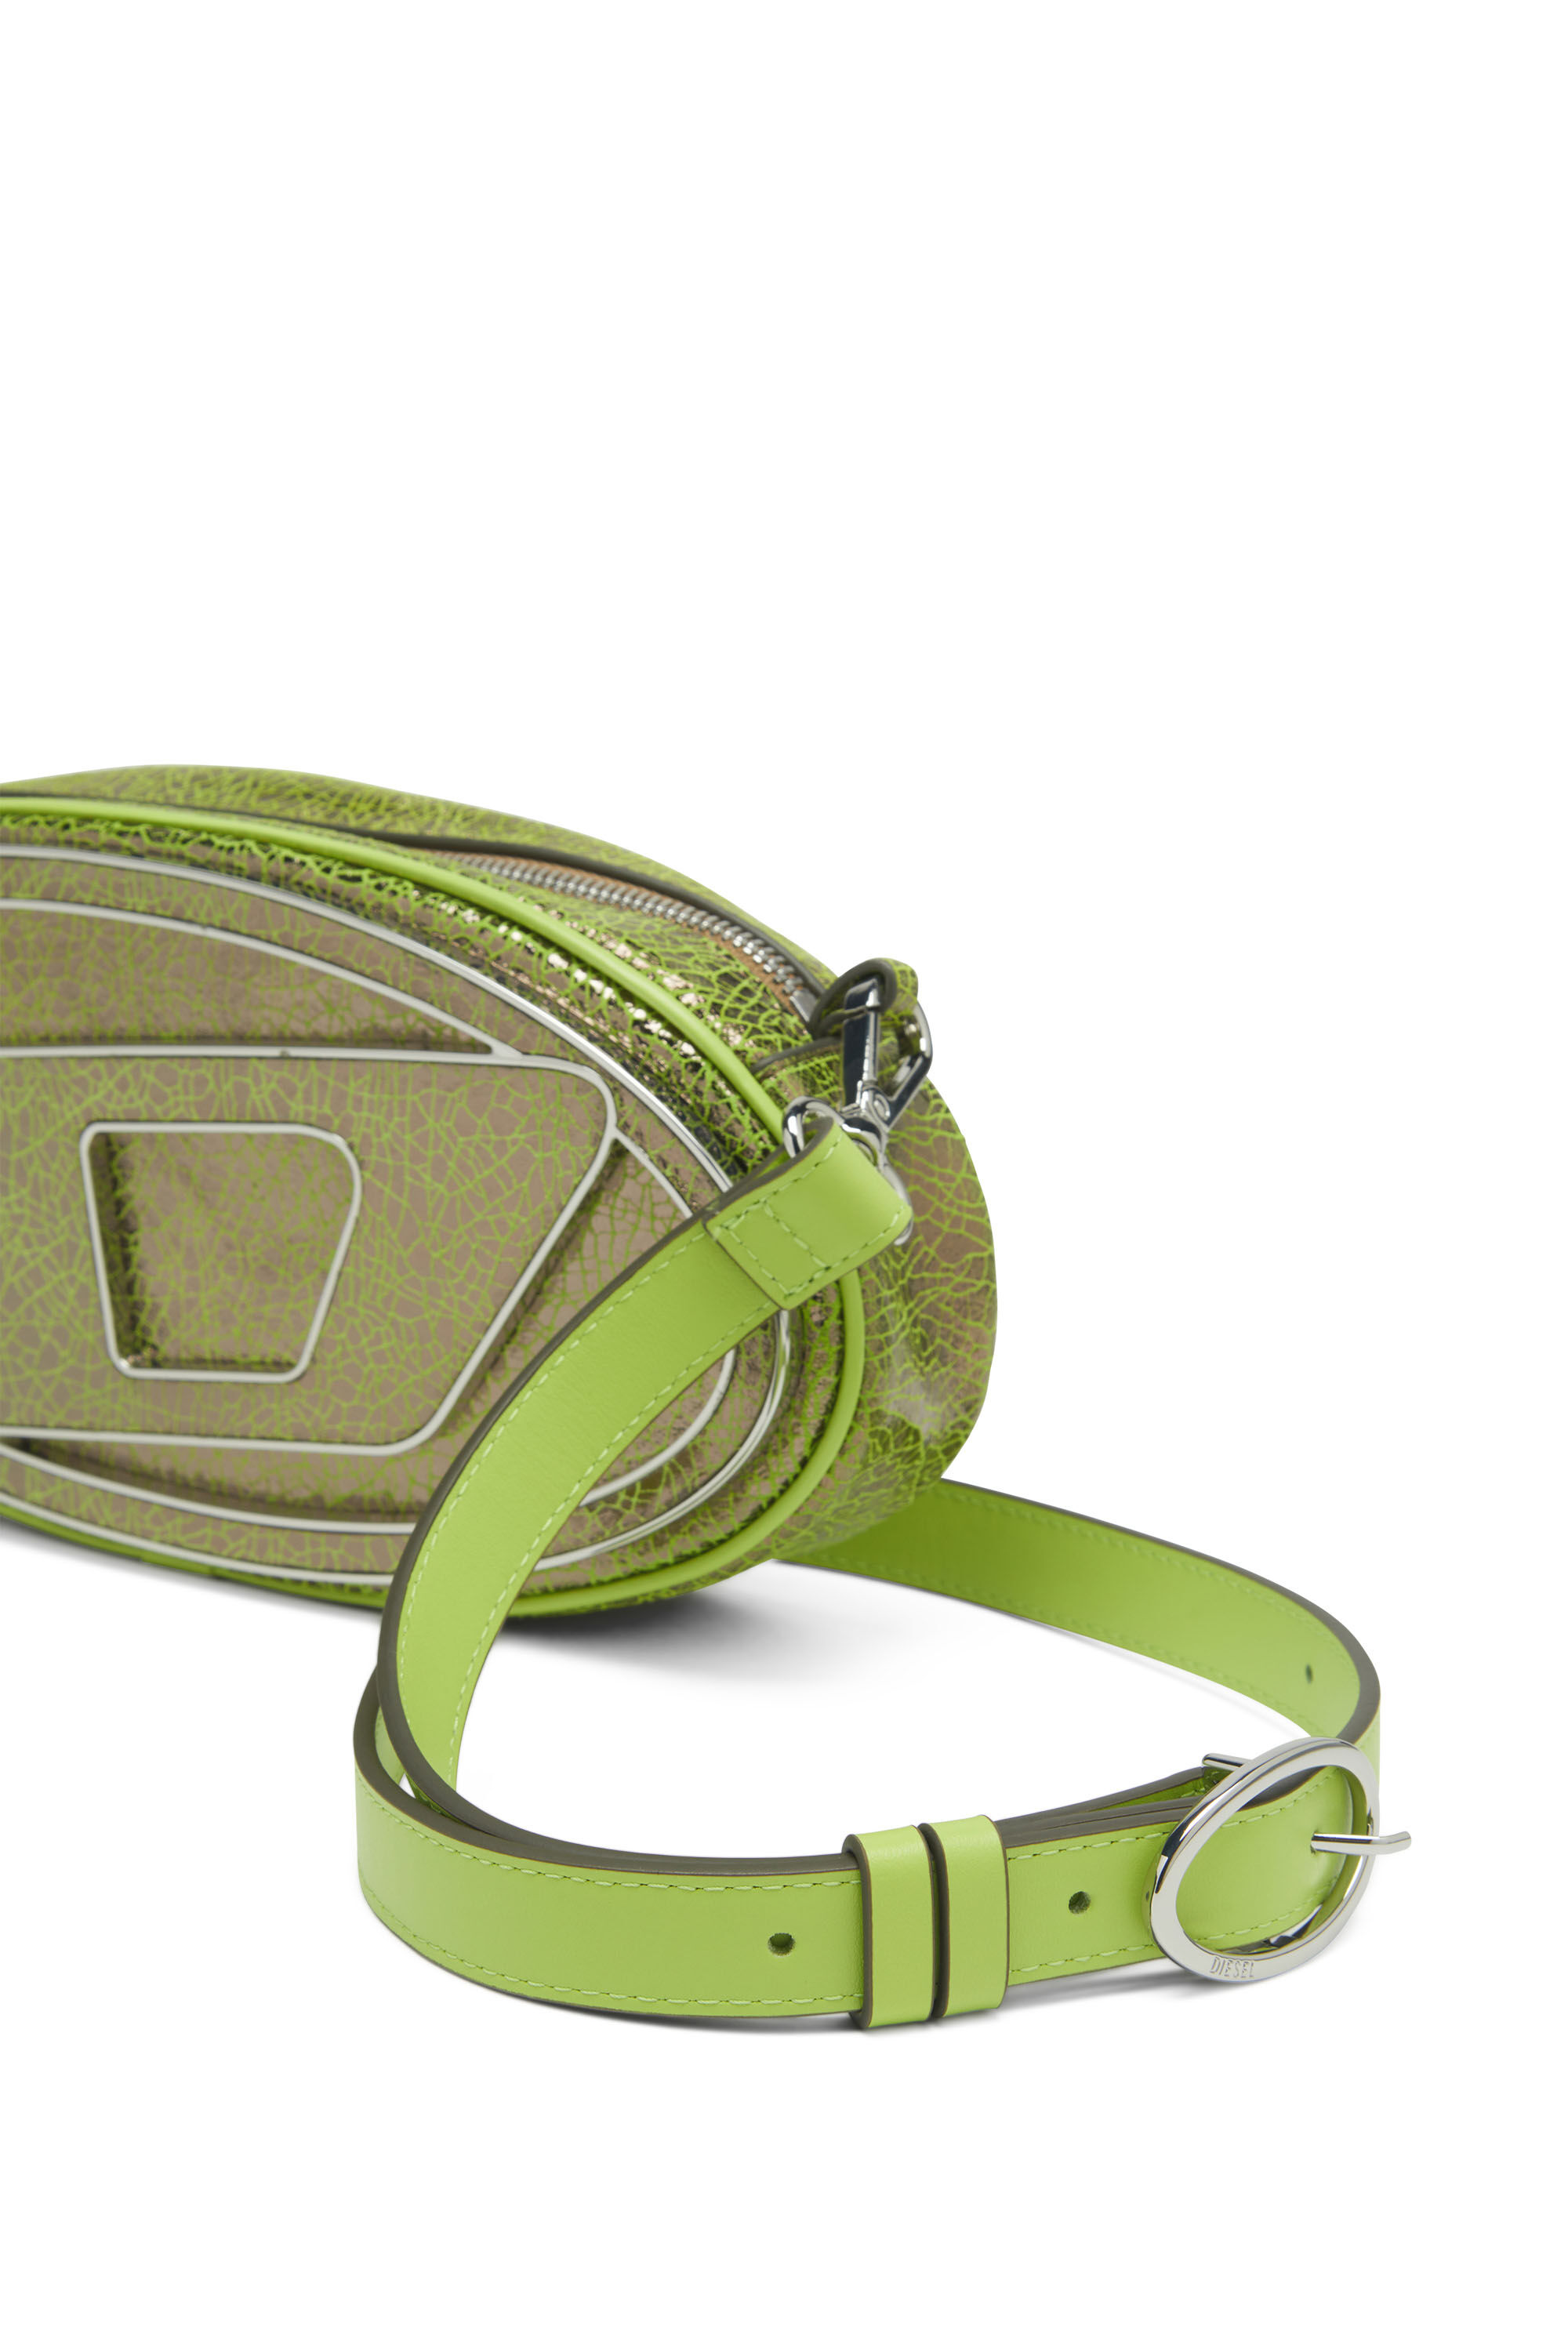 1DR-POUCH Woman: Crossbody bag in cracked leather | Diesel